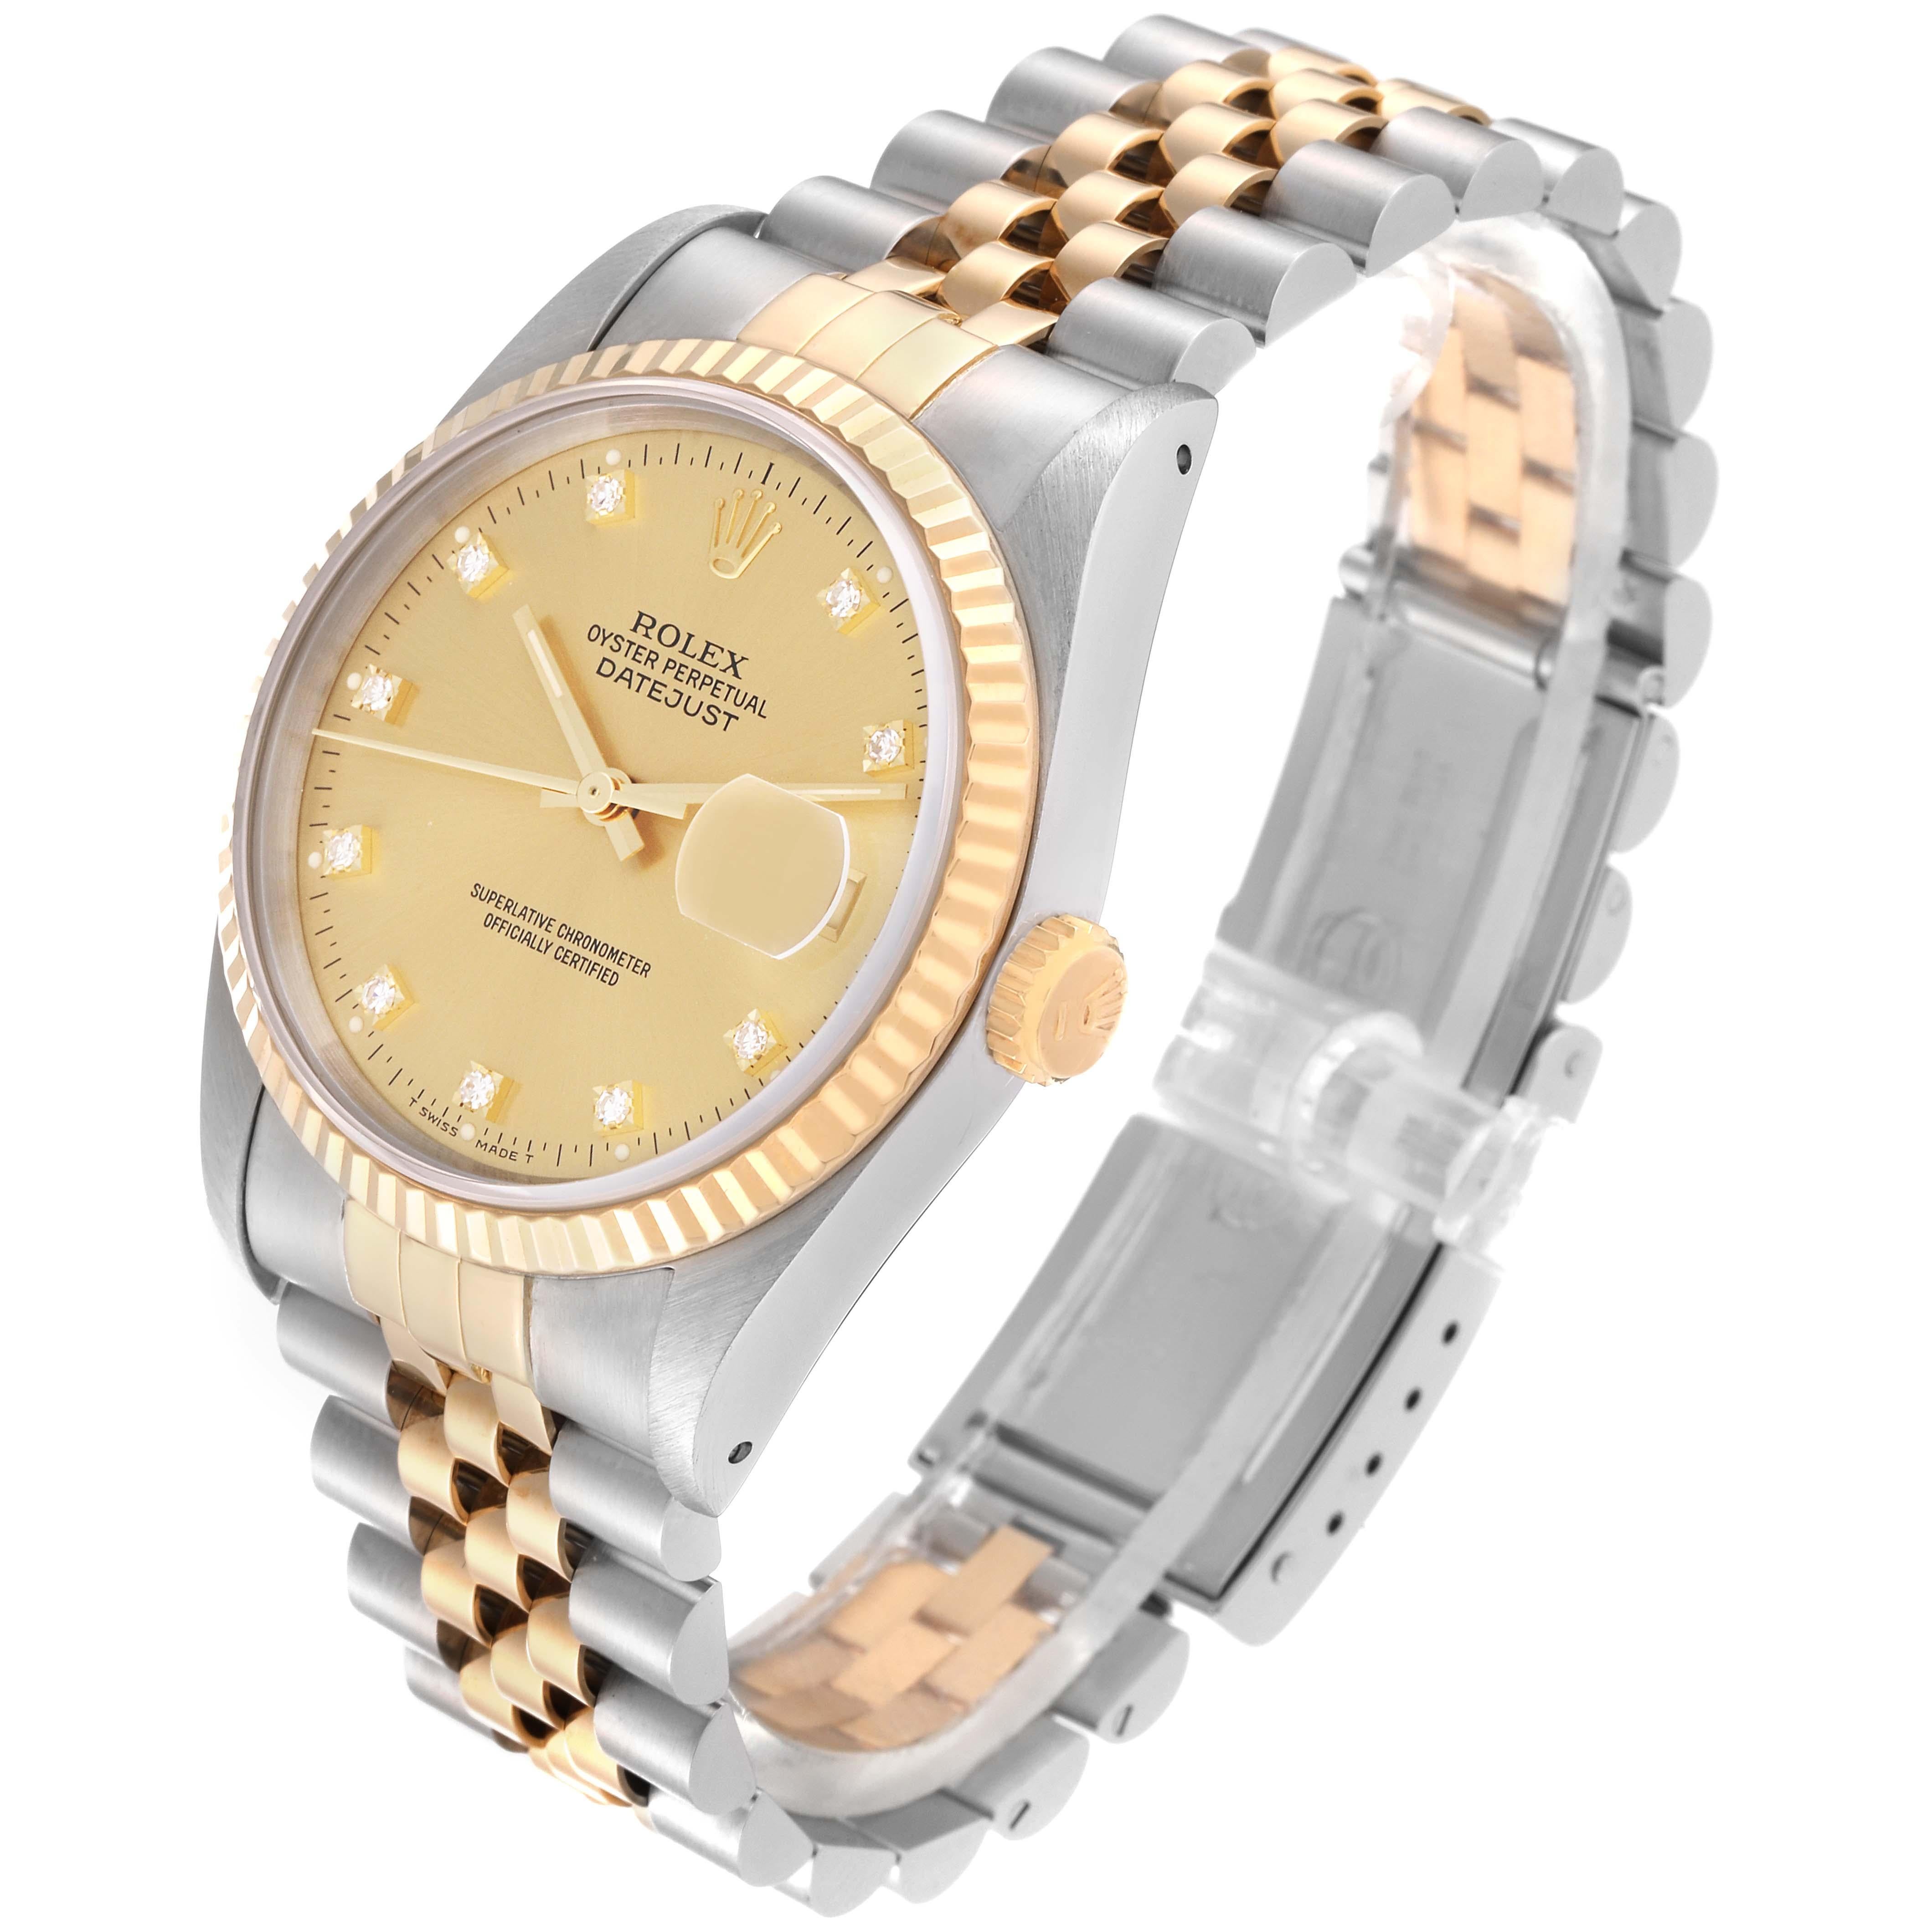 Rolex Datejust Champagne Diamond Dial Steel Yellow Gold Mens Watch 16233 For Sale 4